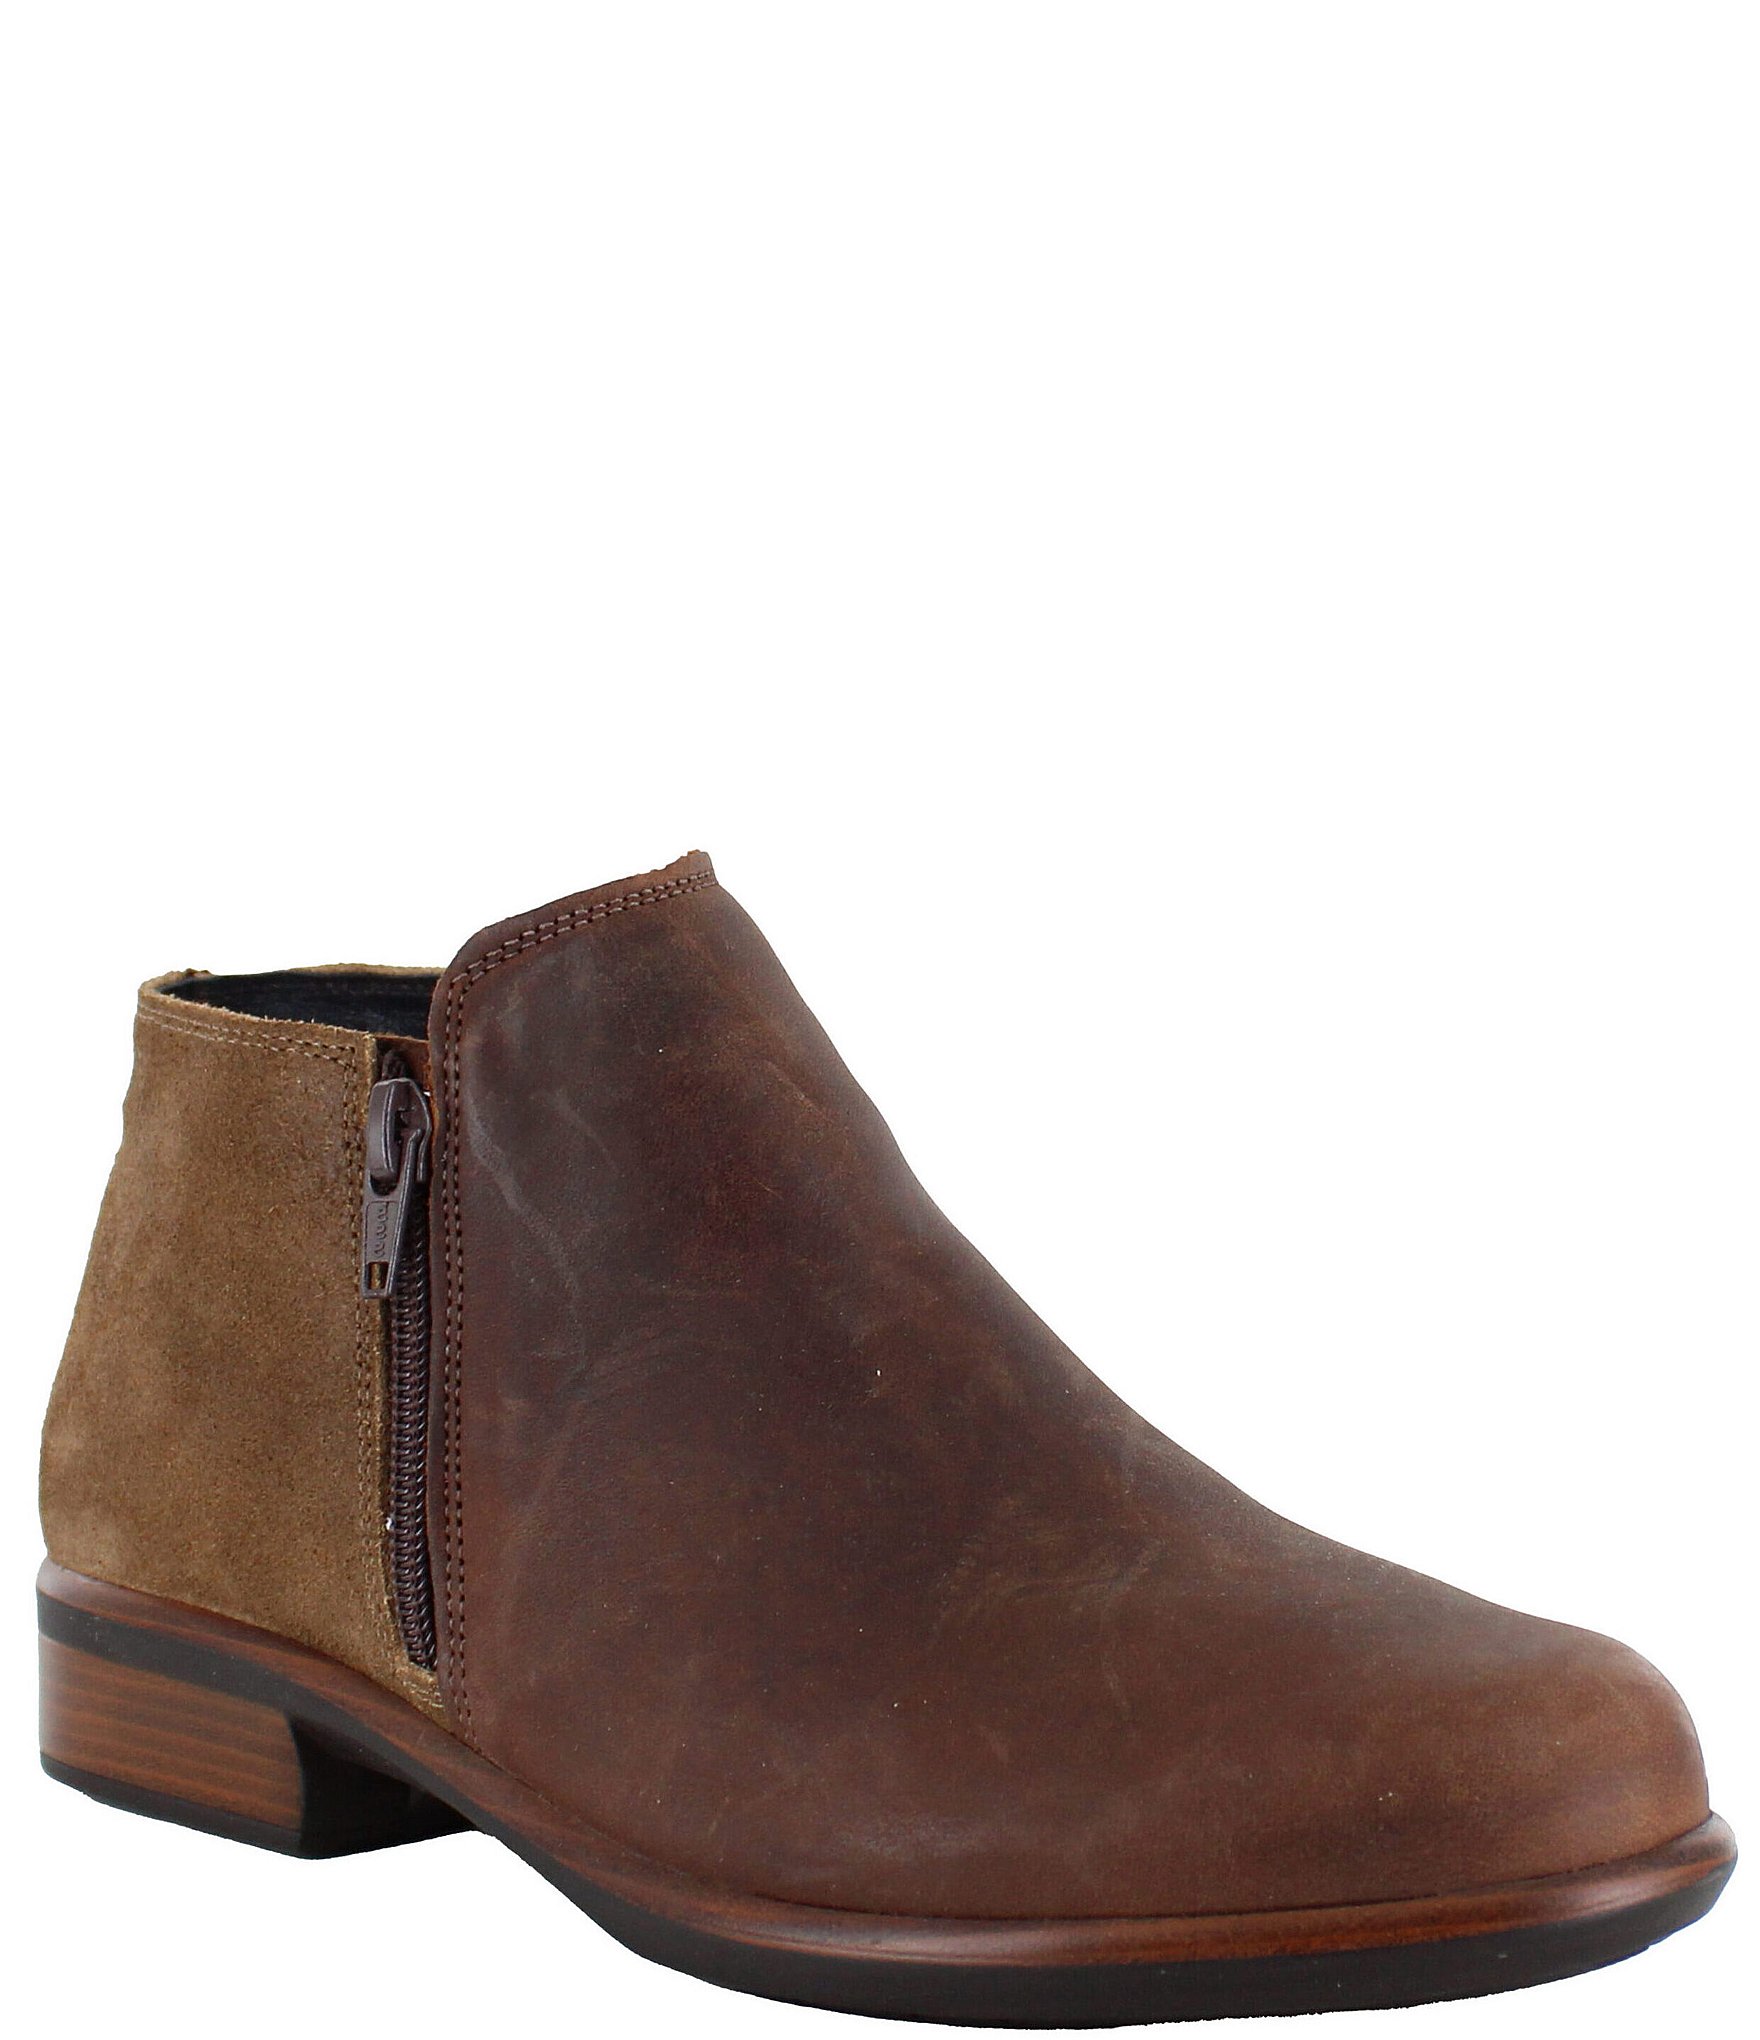 Naot Helm Leather and Suede Water Resistant Booties | Dillard's